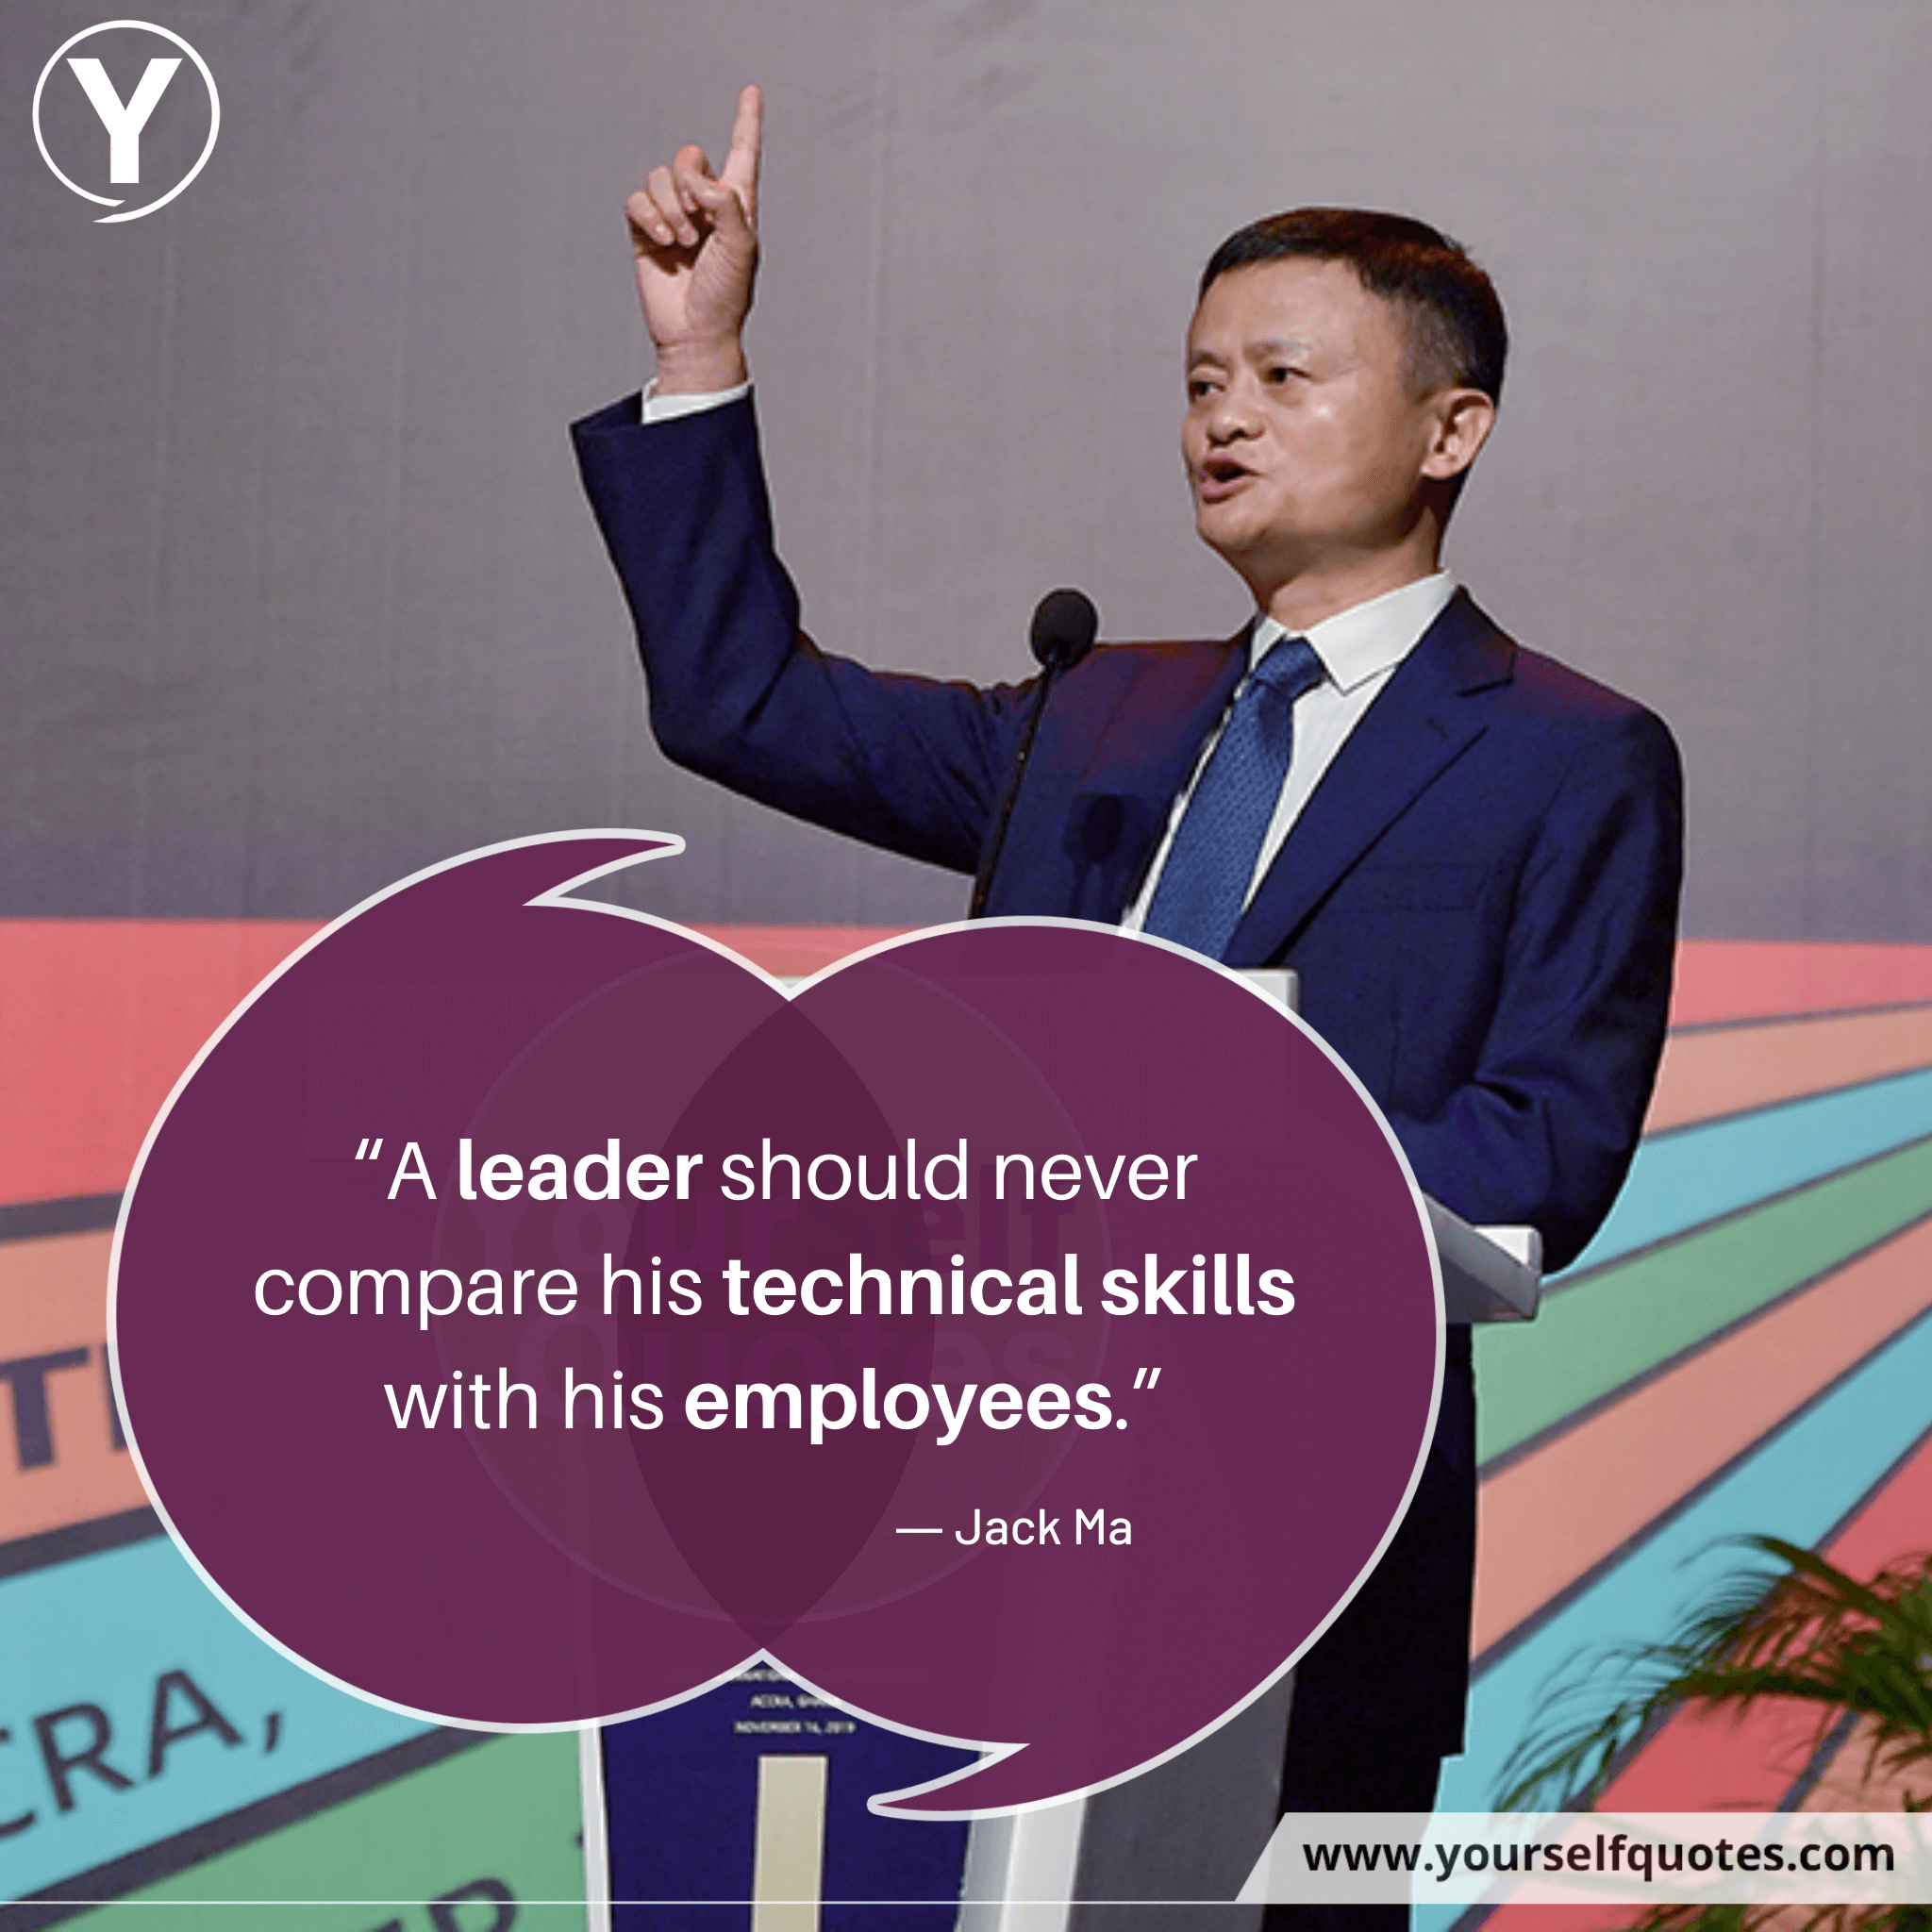 Jack Ma Quotes on Employees